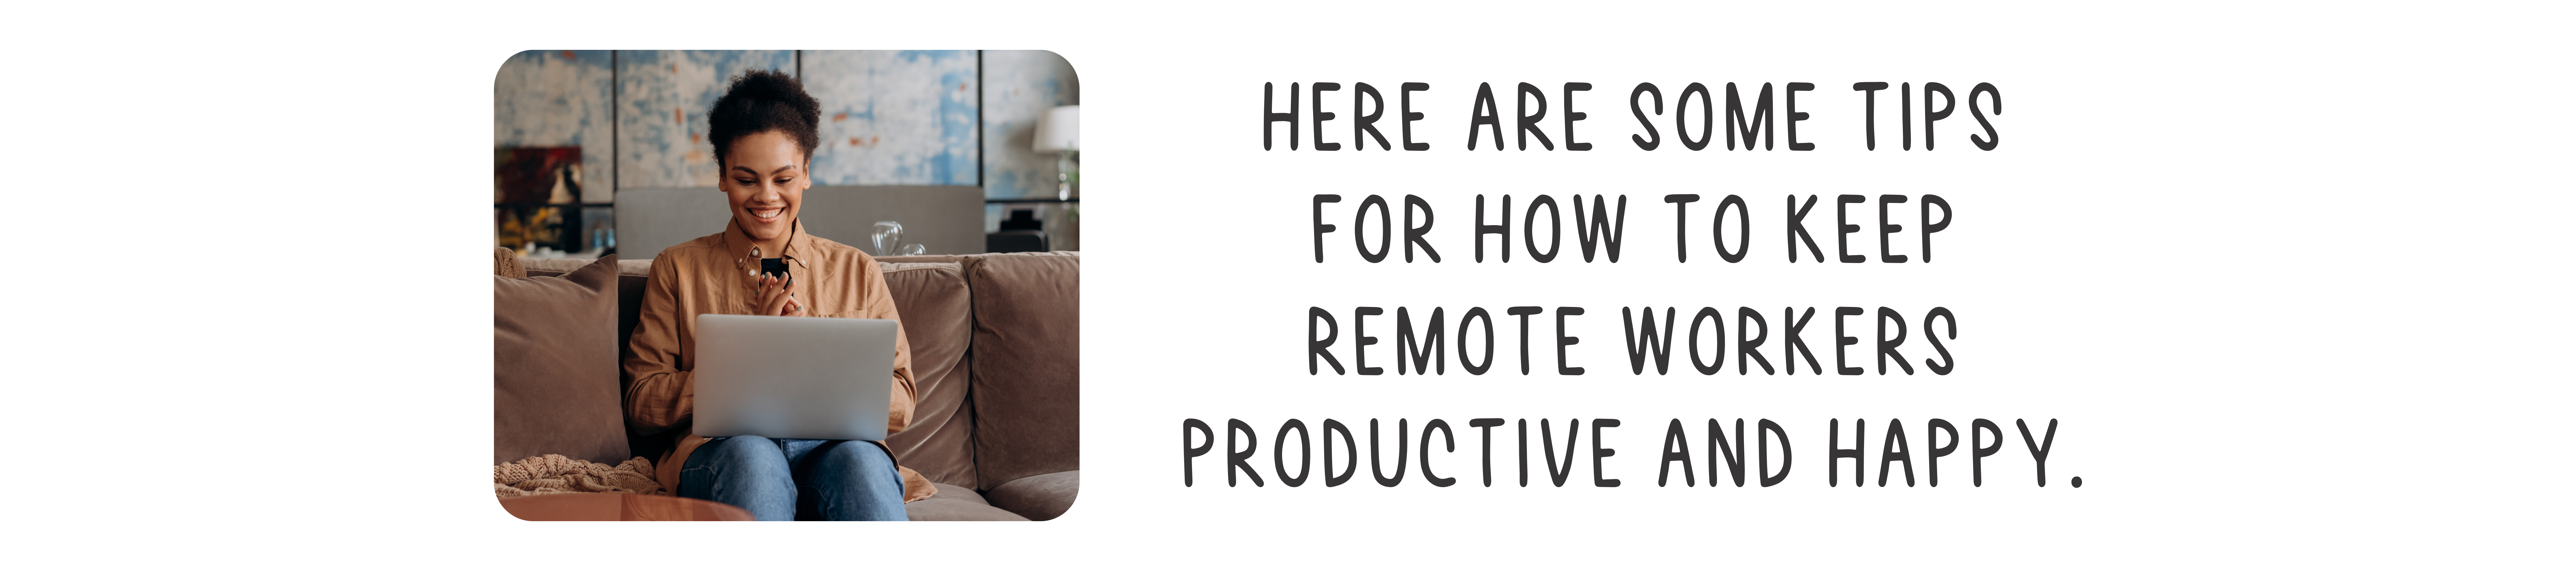 Manage remote team tips